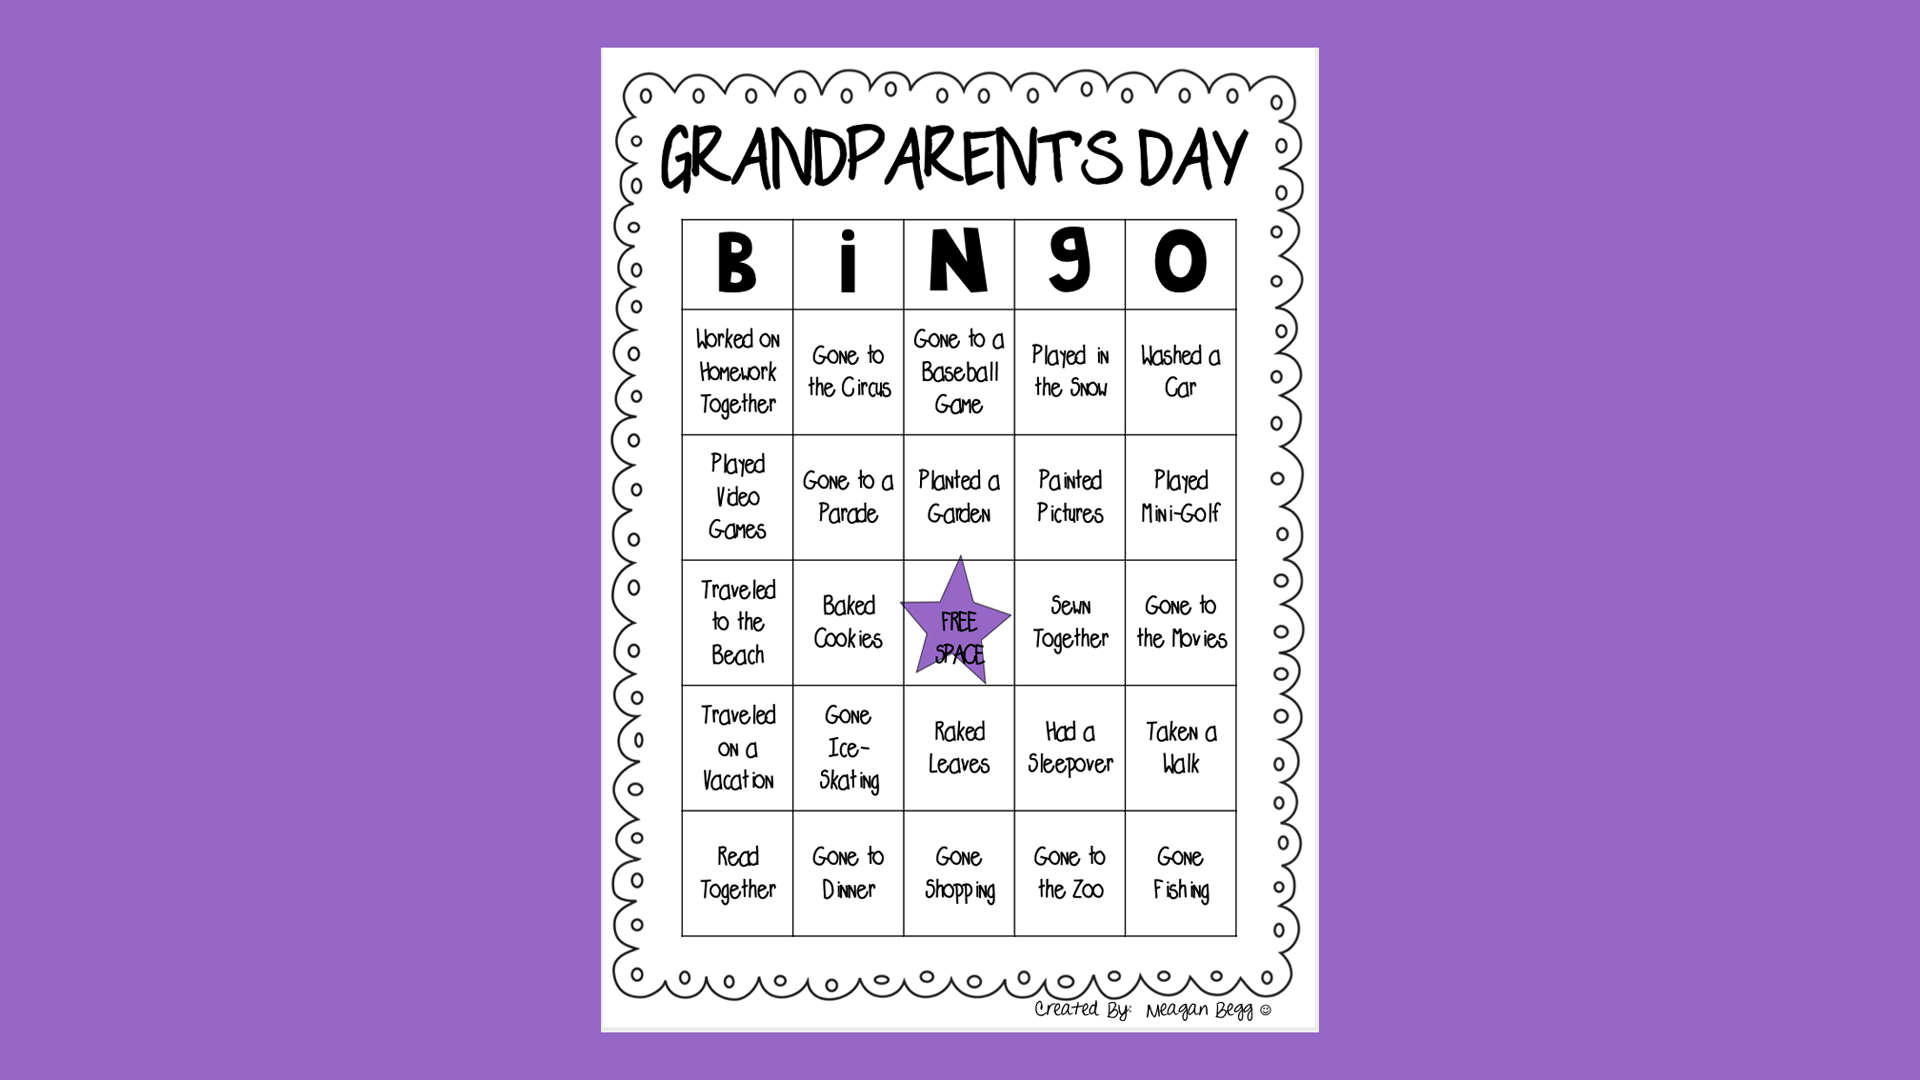 image of a grandparent's day themed bingo card with spaces describing different activities kids might do with their grandparents